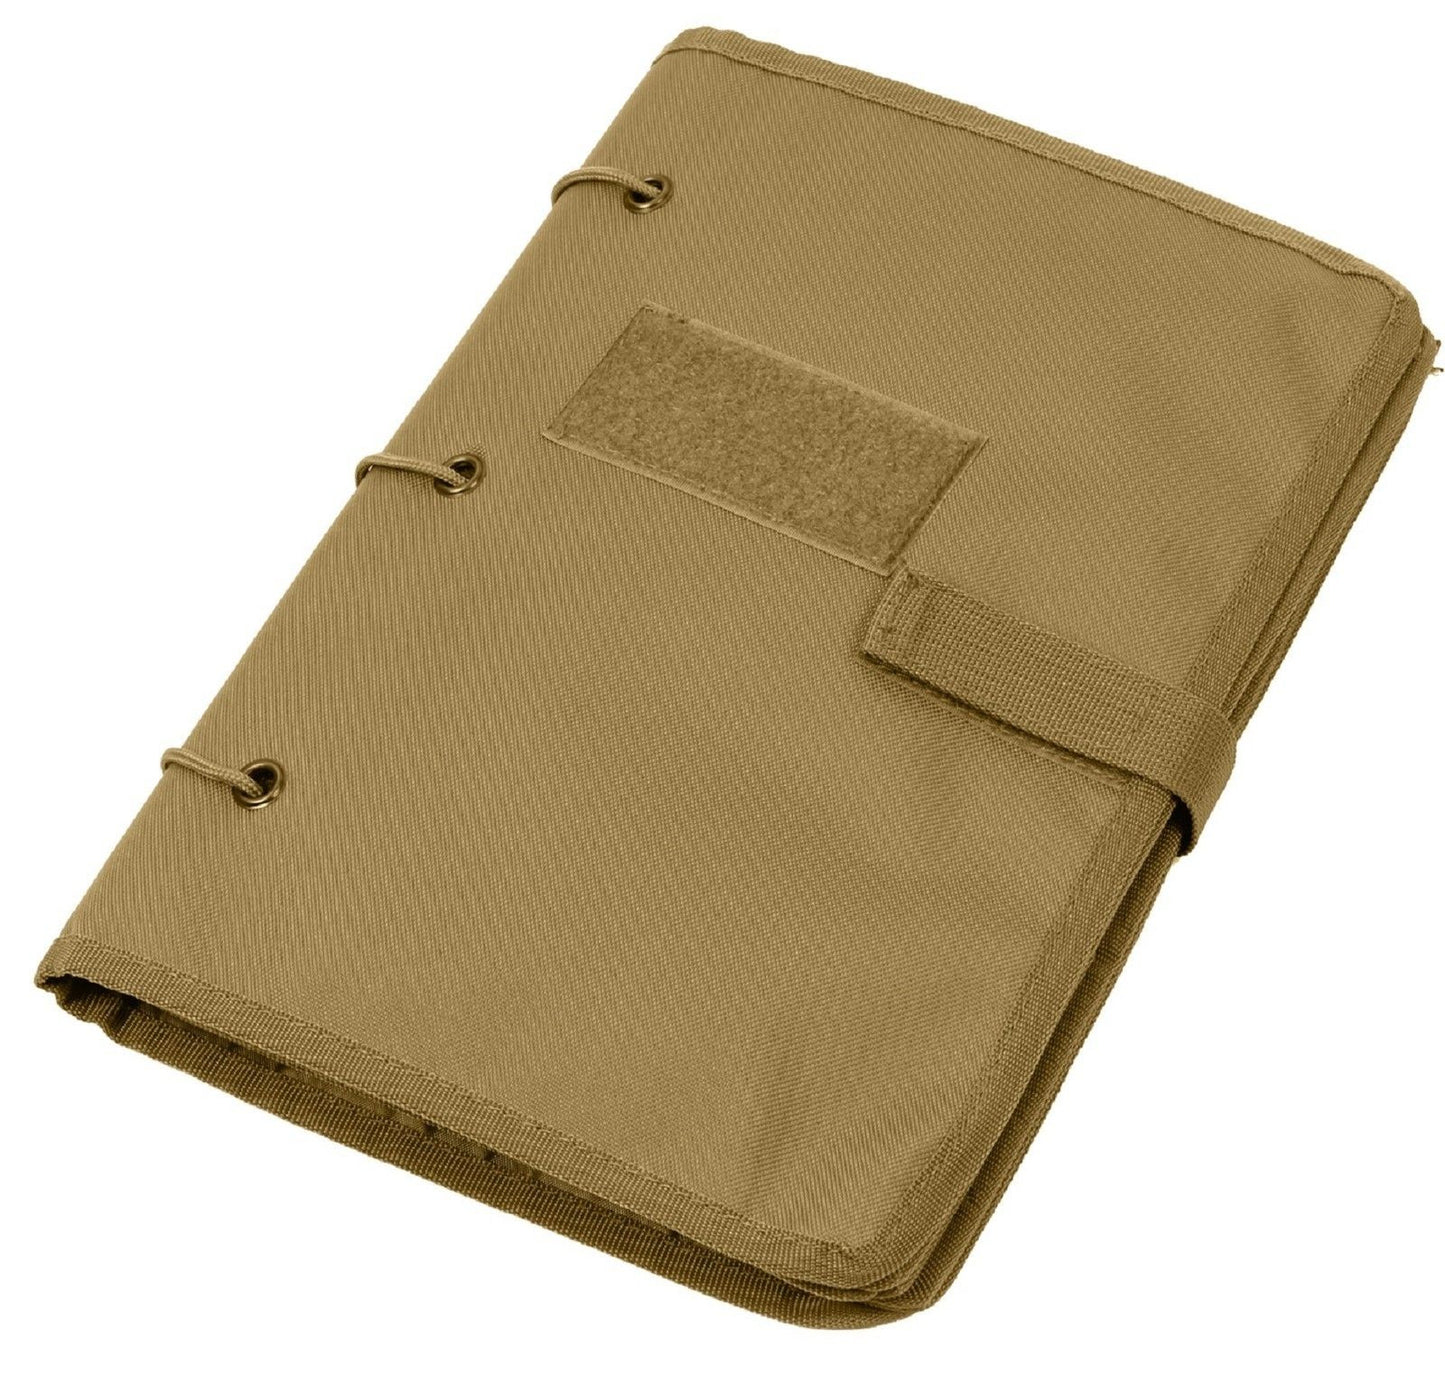 Coyote Brown Hook & Loop Tactical Patch Book - 10 Page Morale Patches Holder